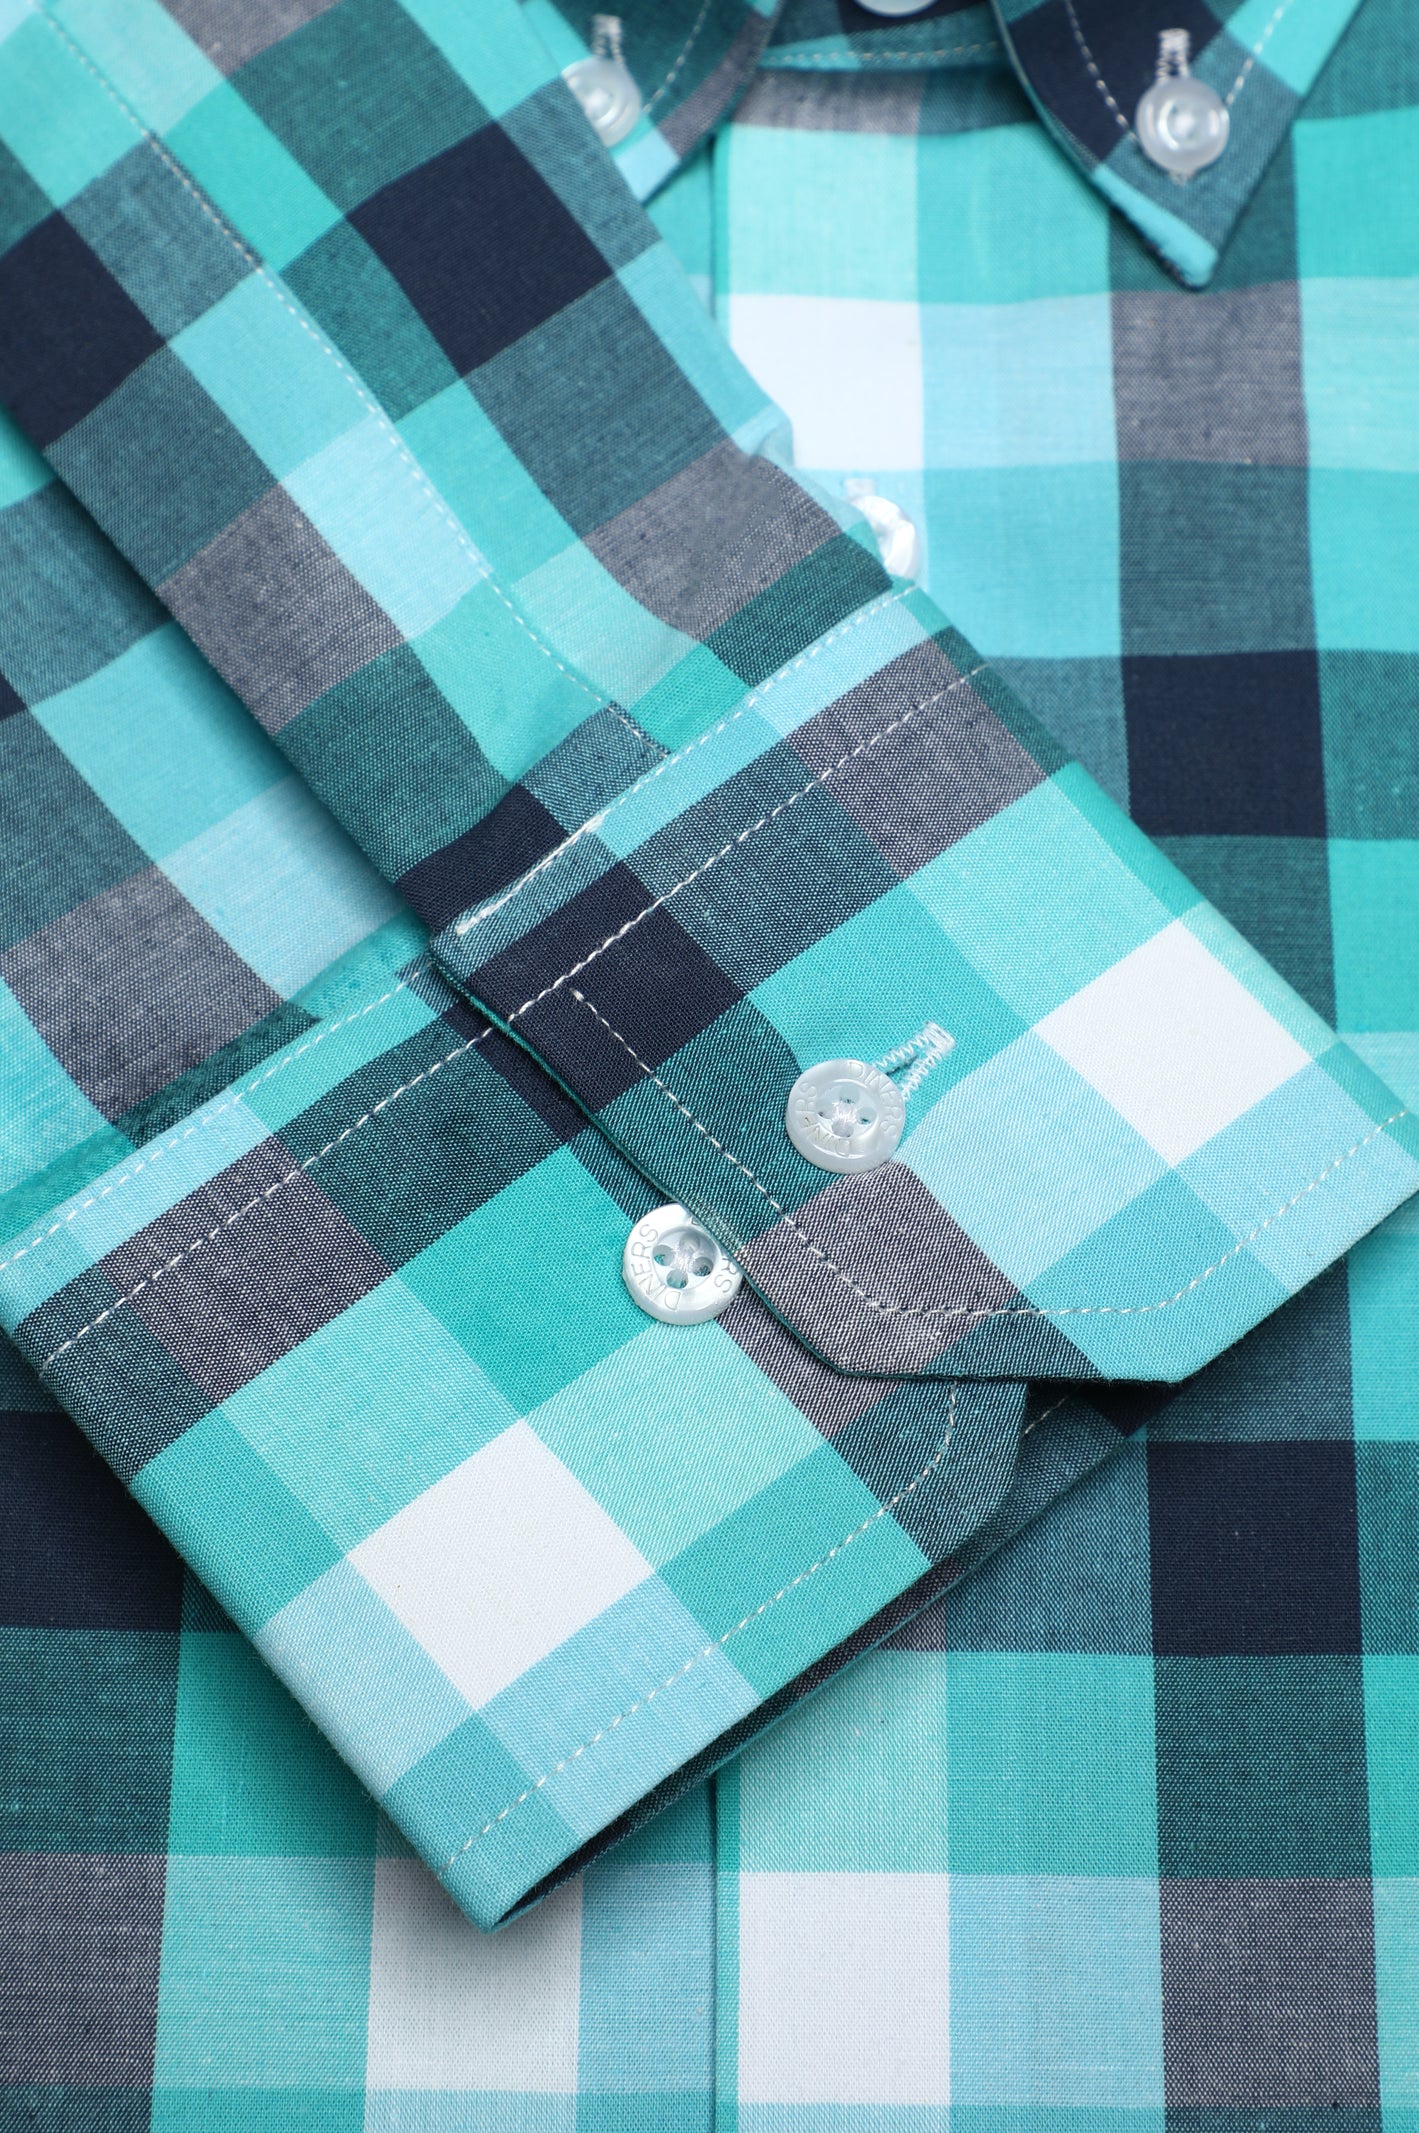 Aqua Gingham Check Casual Shirt From Diners